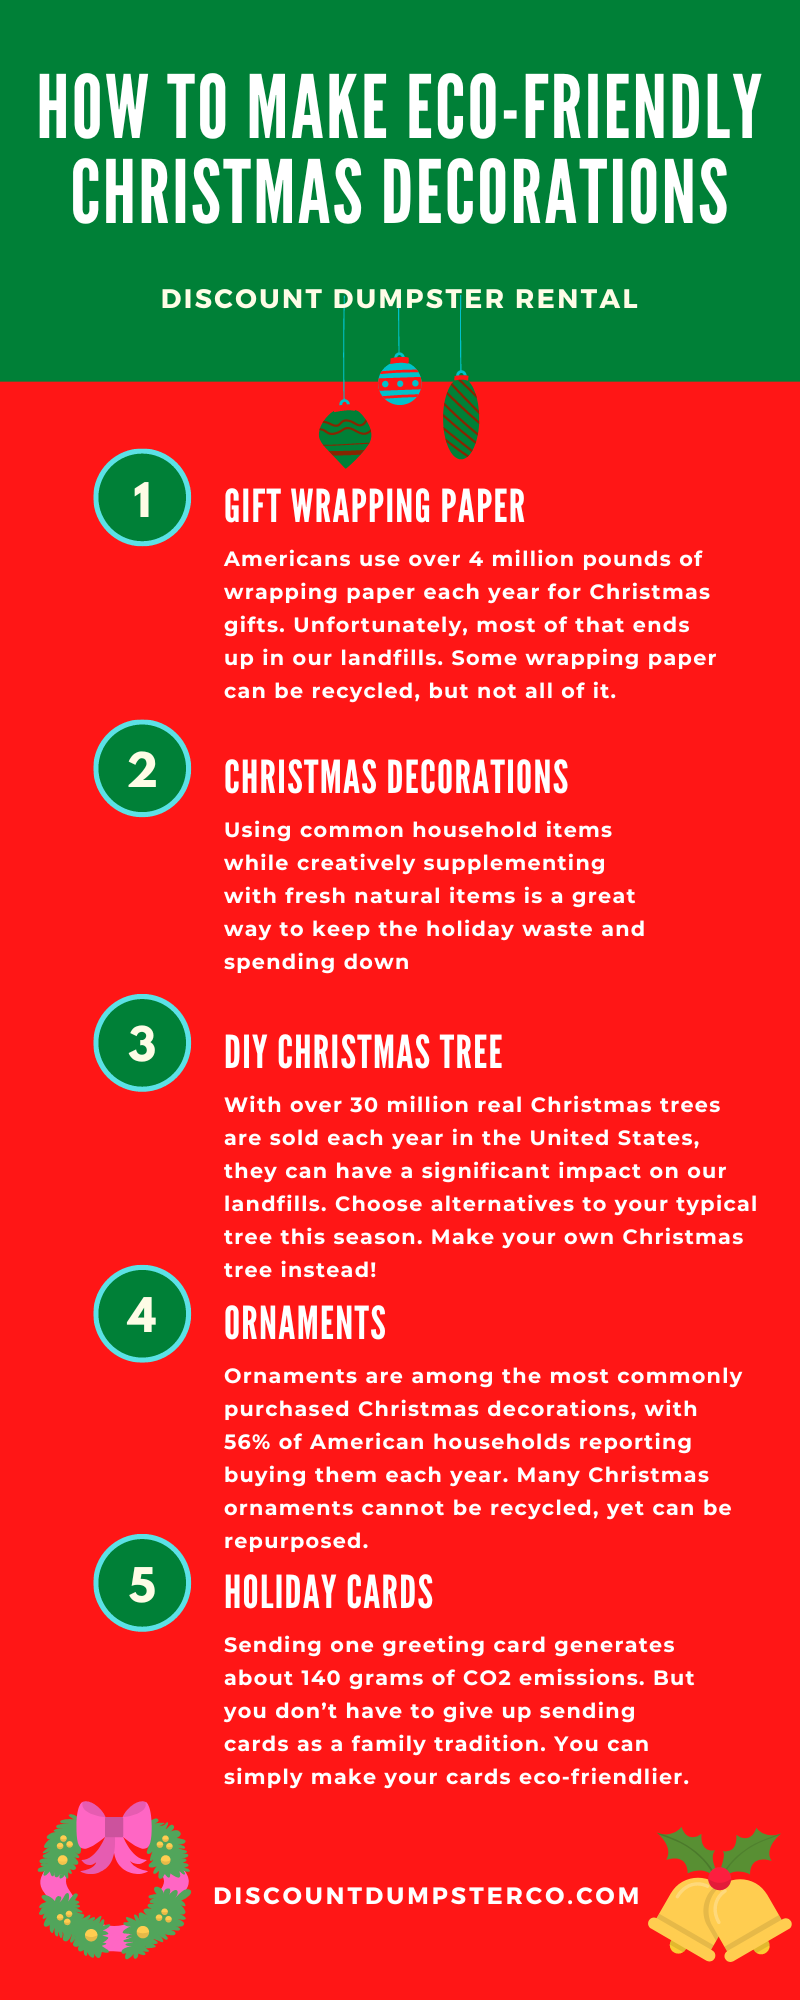 An infographic detailing how to make eco-friendly Christmas decorations